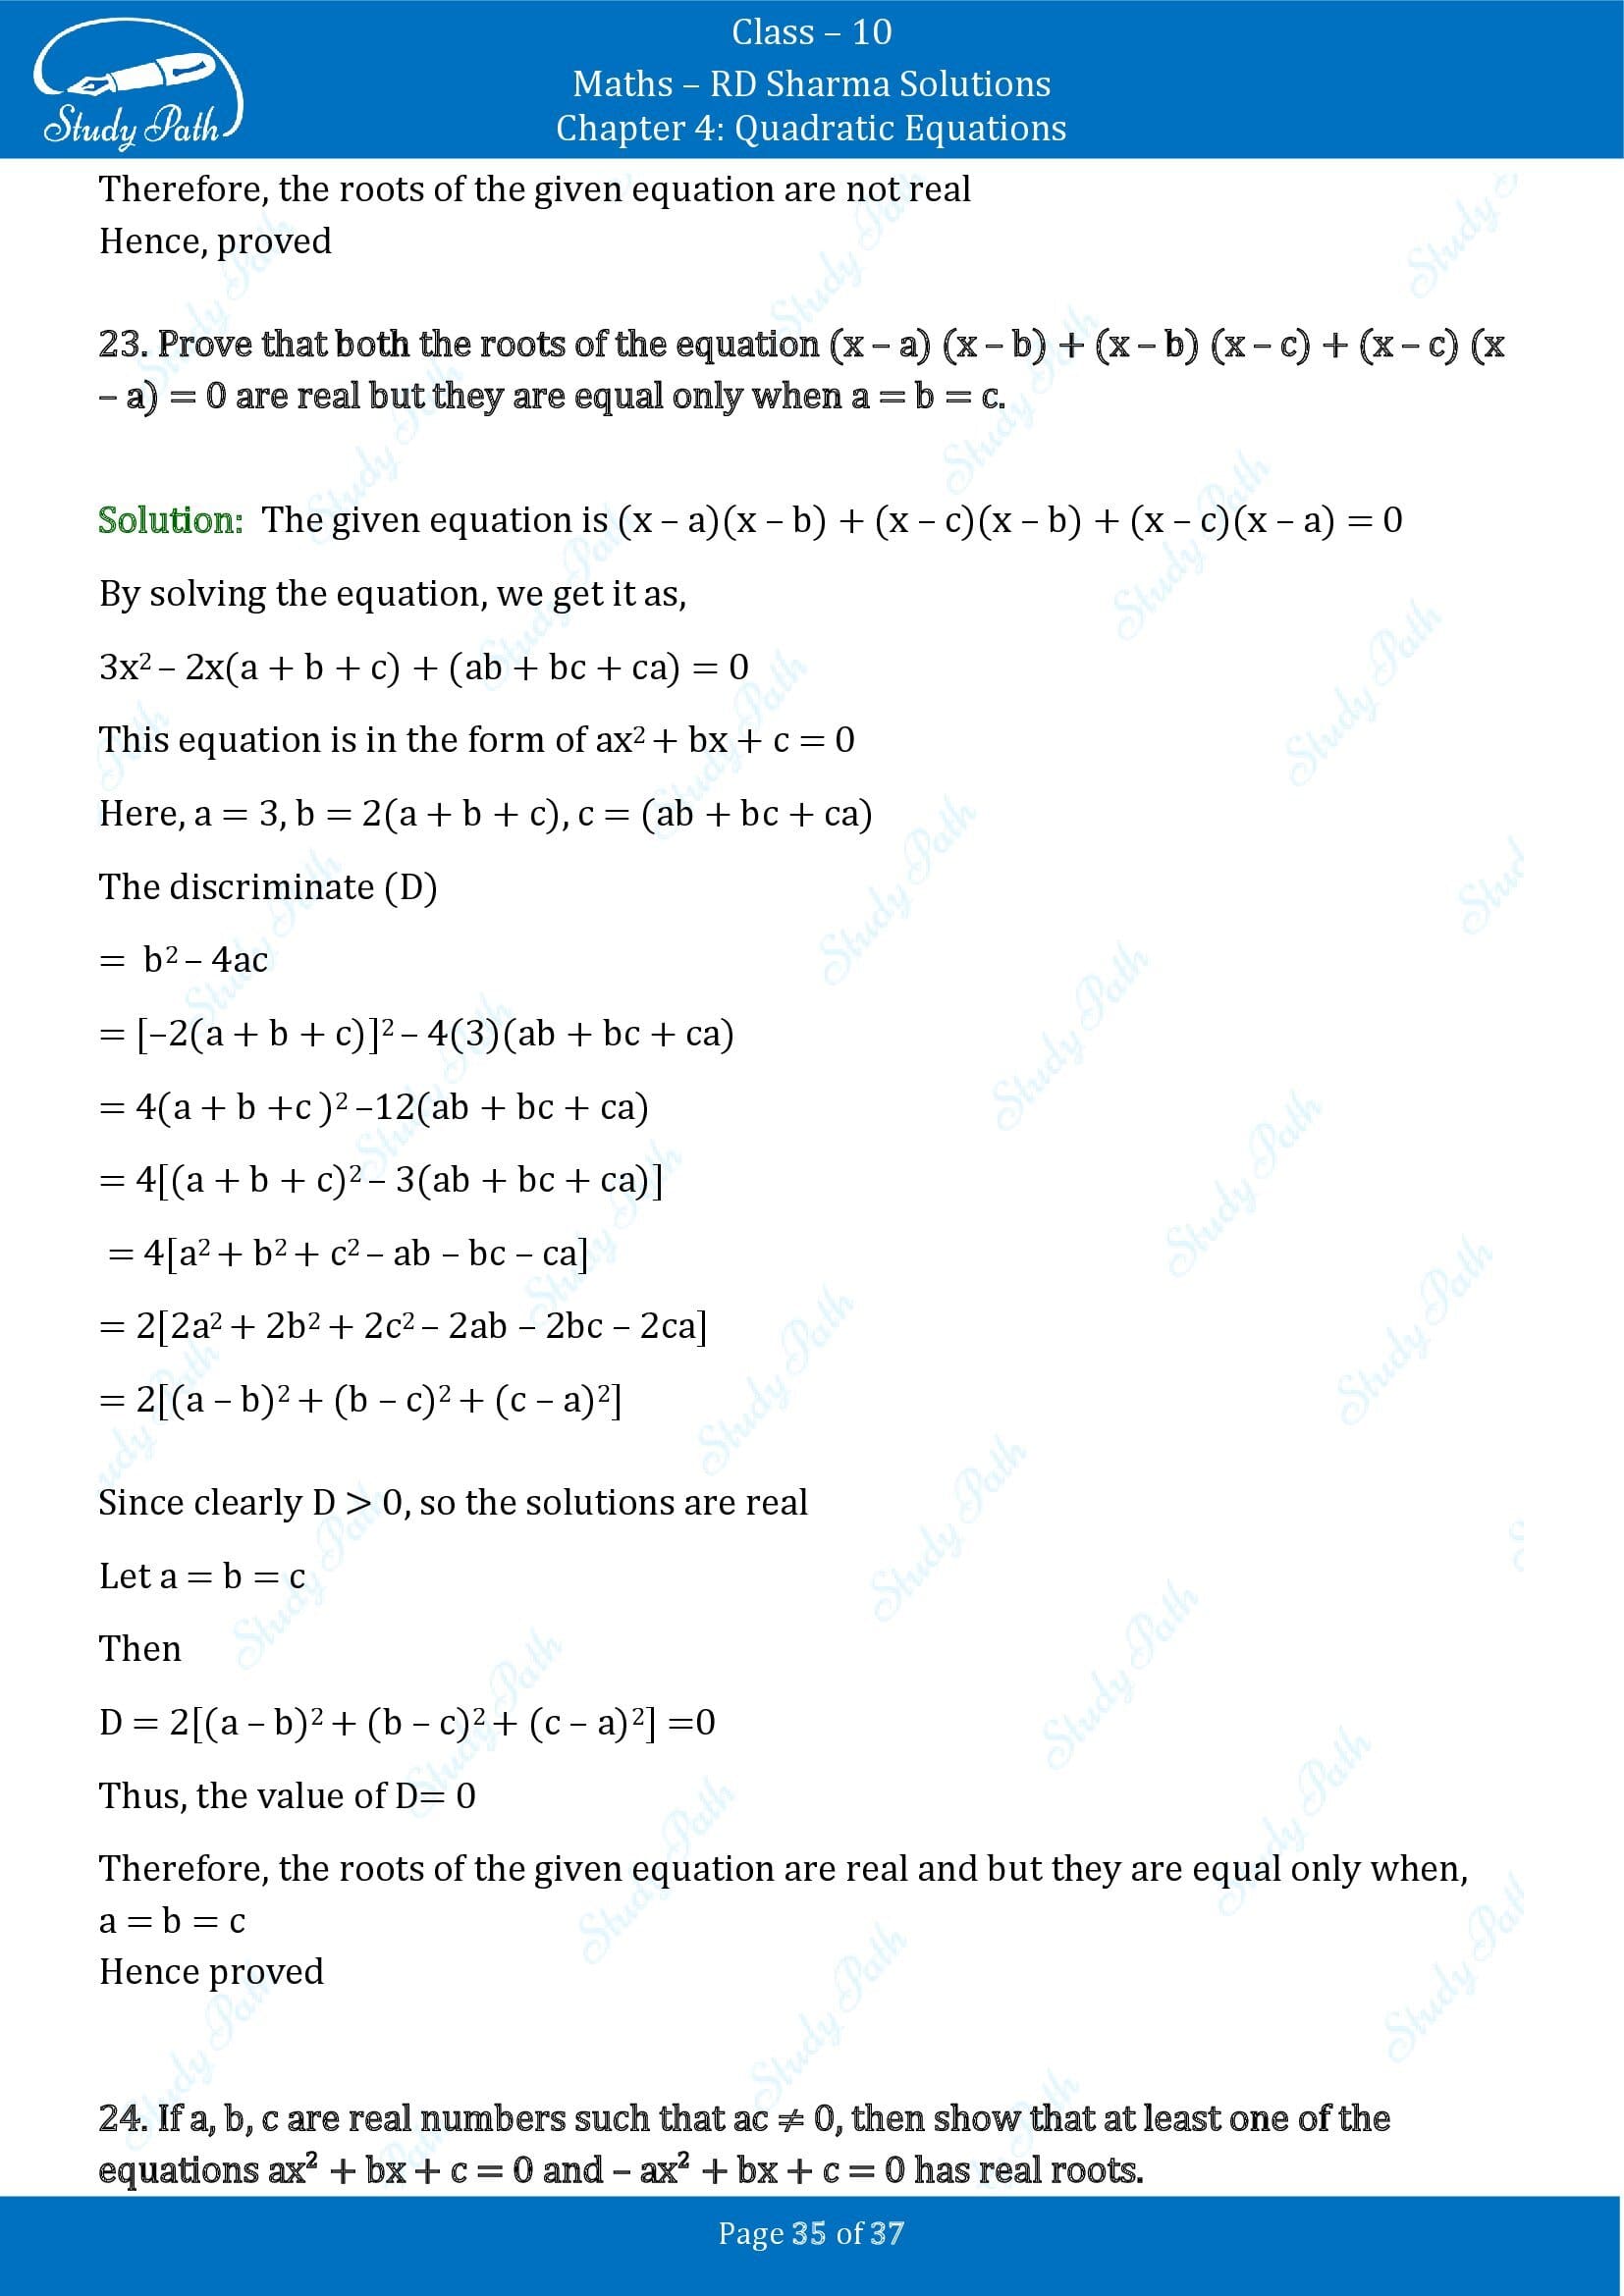 RD Sharma Solutions Class 10 Chapter 4 Quadratic Equations Exercise 4.6 00035